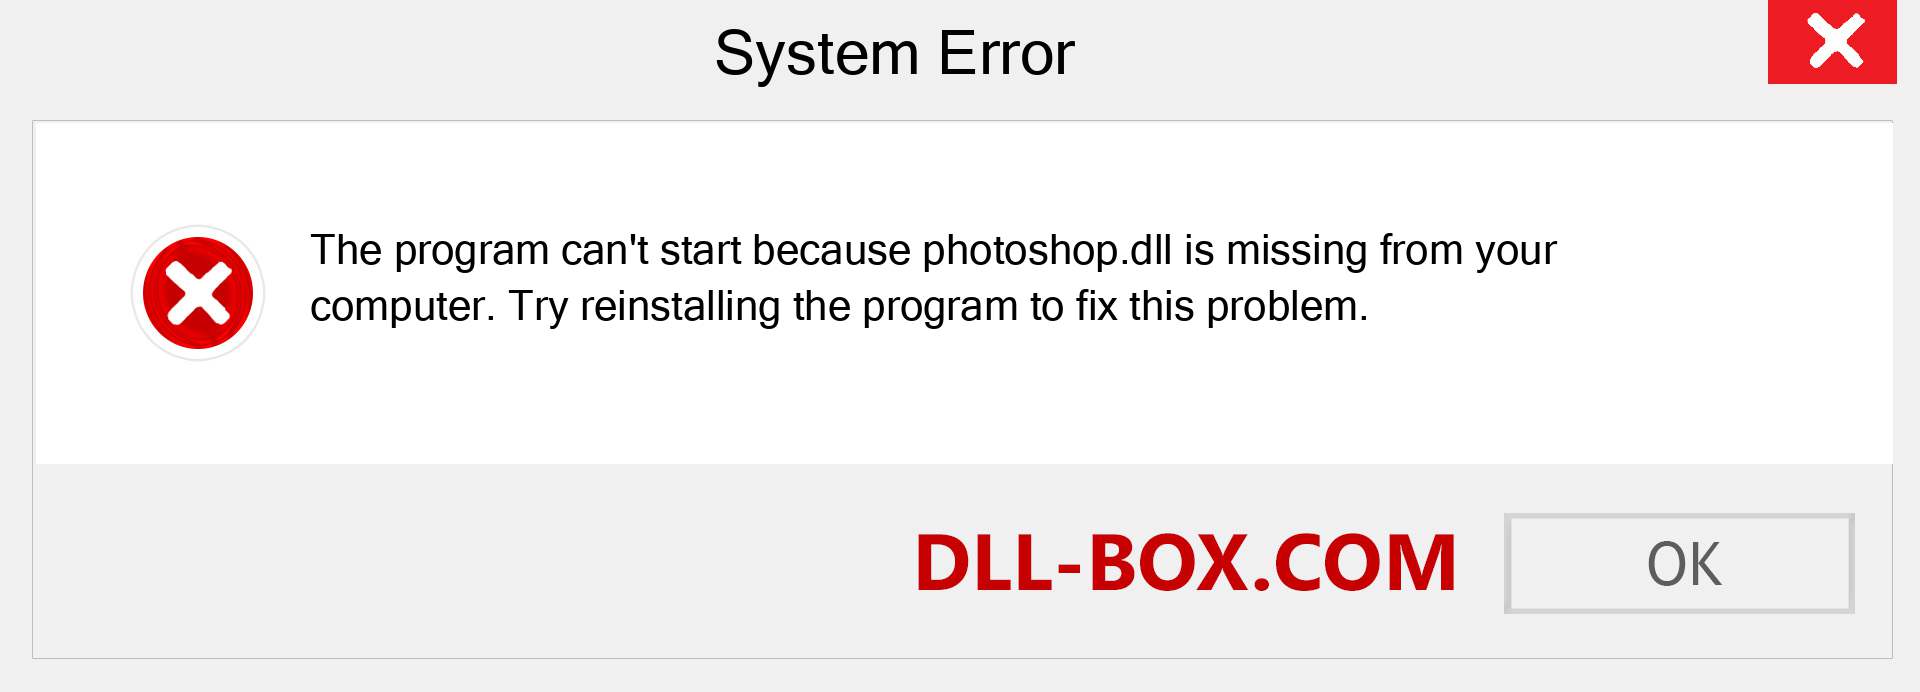  photoshop.dll file is missing?. Download for Windows 7, 8, 10 - Fix  photoshop dll Missing Error on Windows, photos, images